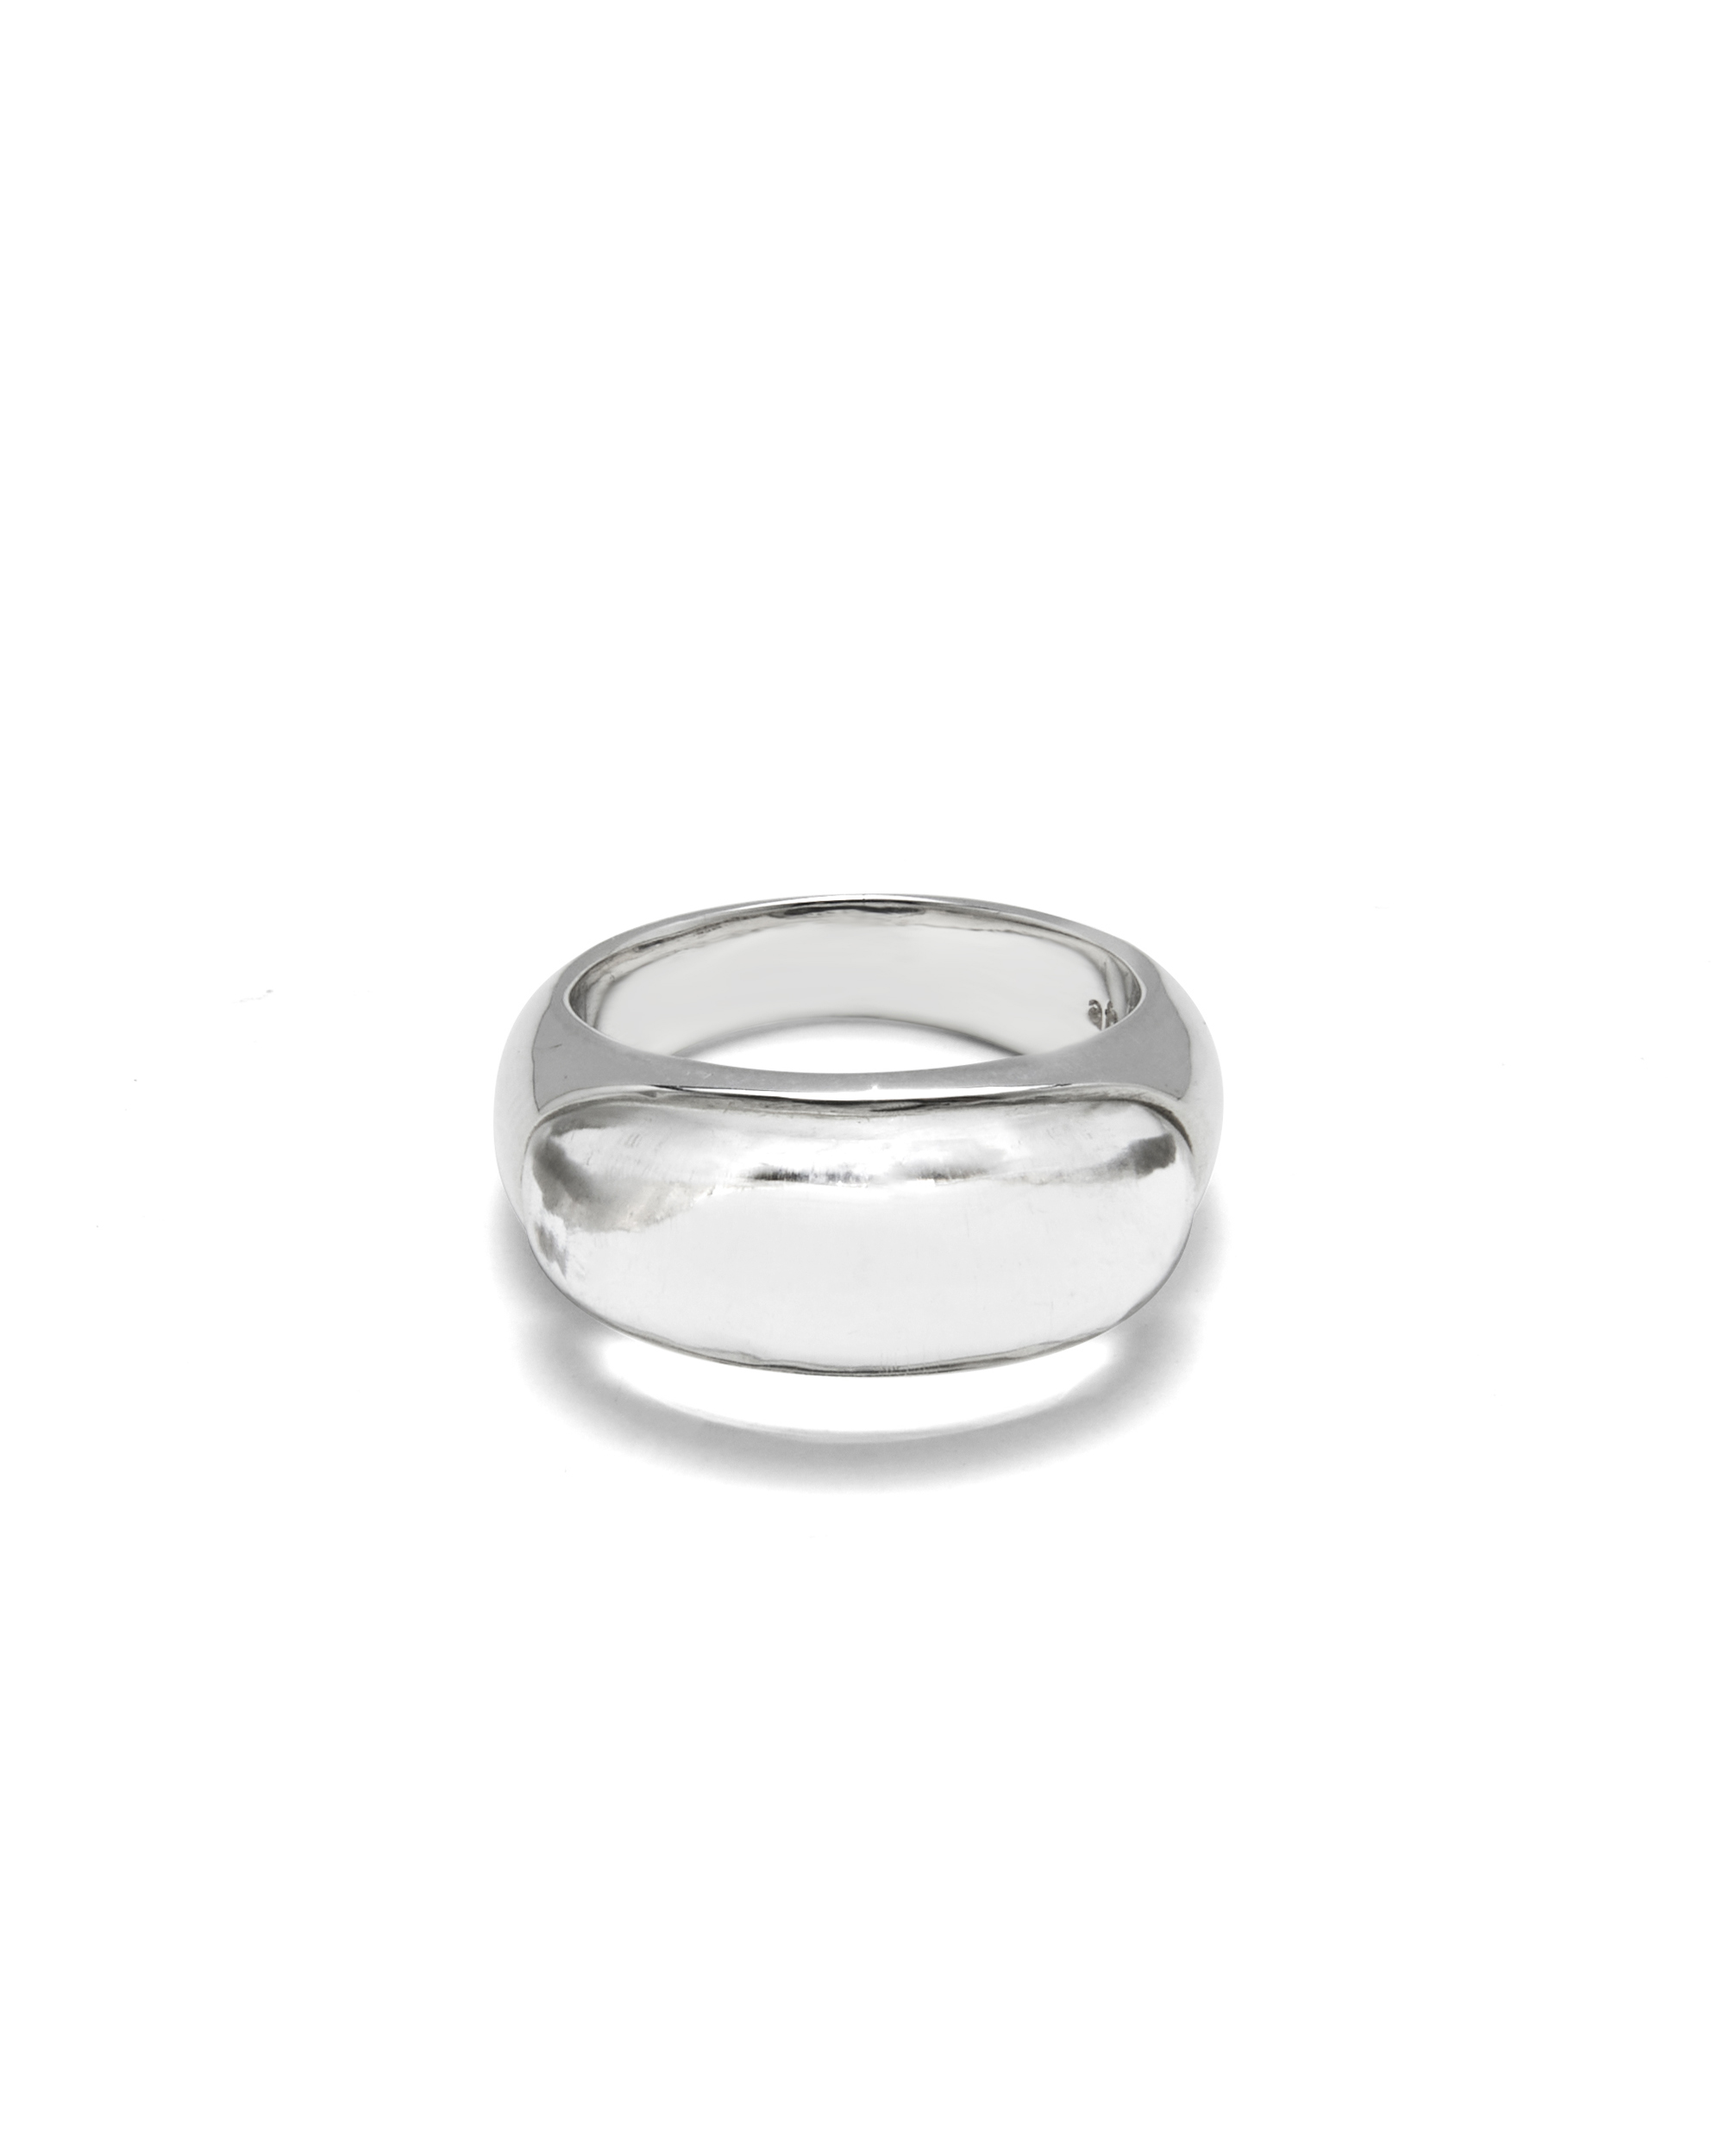 Clean crescent moon ring